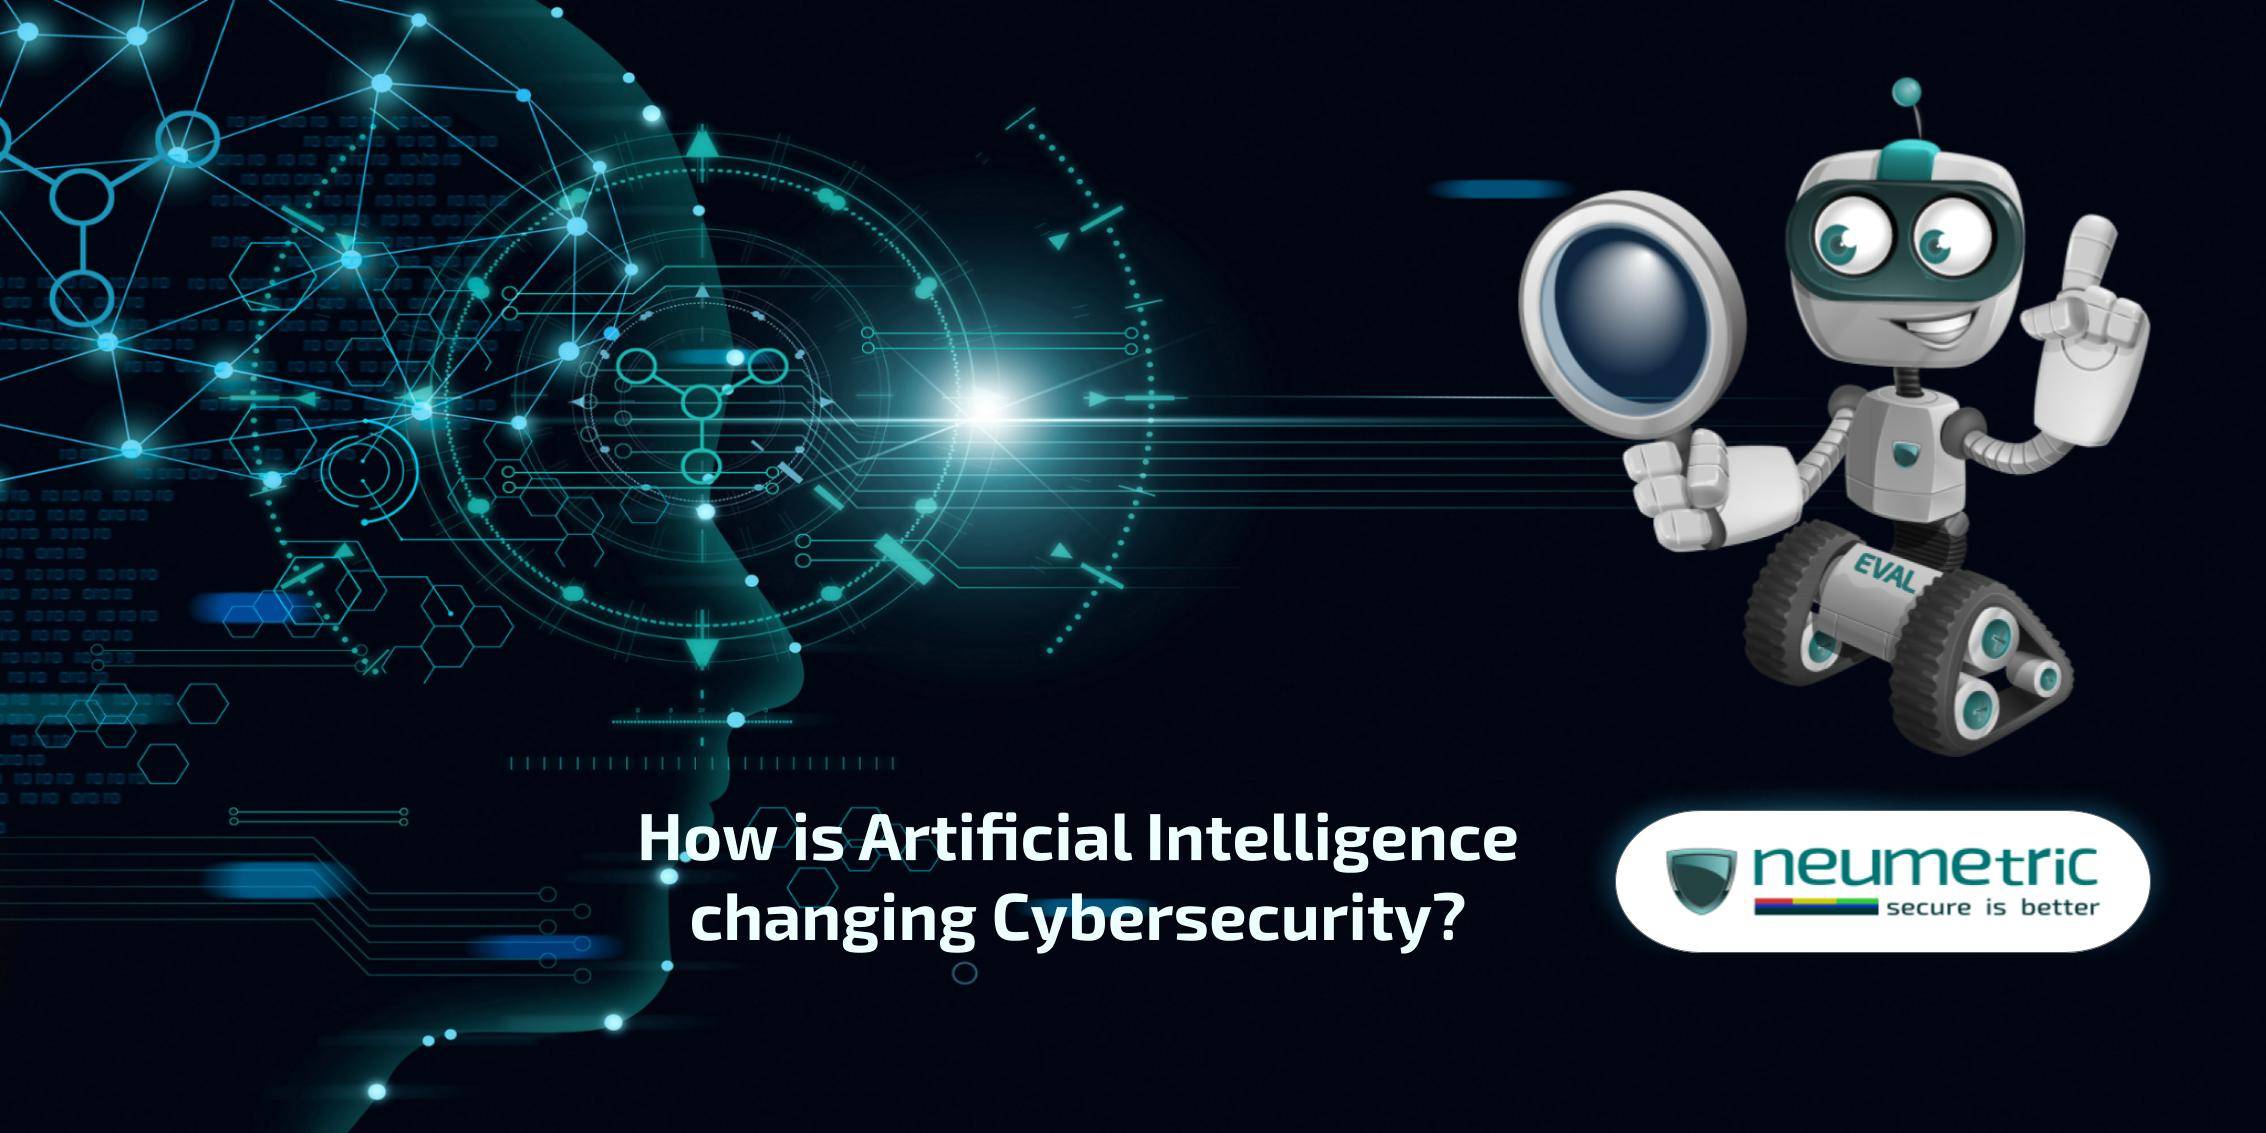 How is Artificial Intelligence changing Cybersecurity?